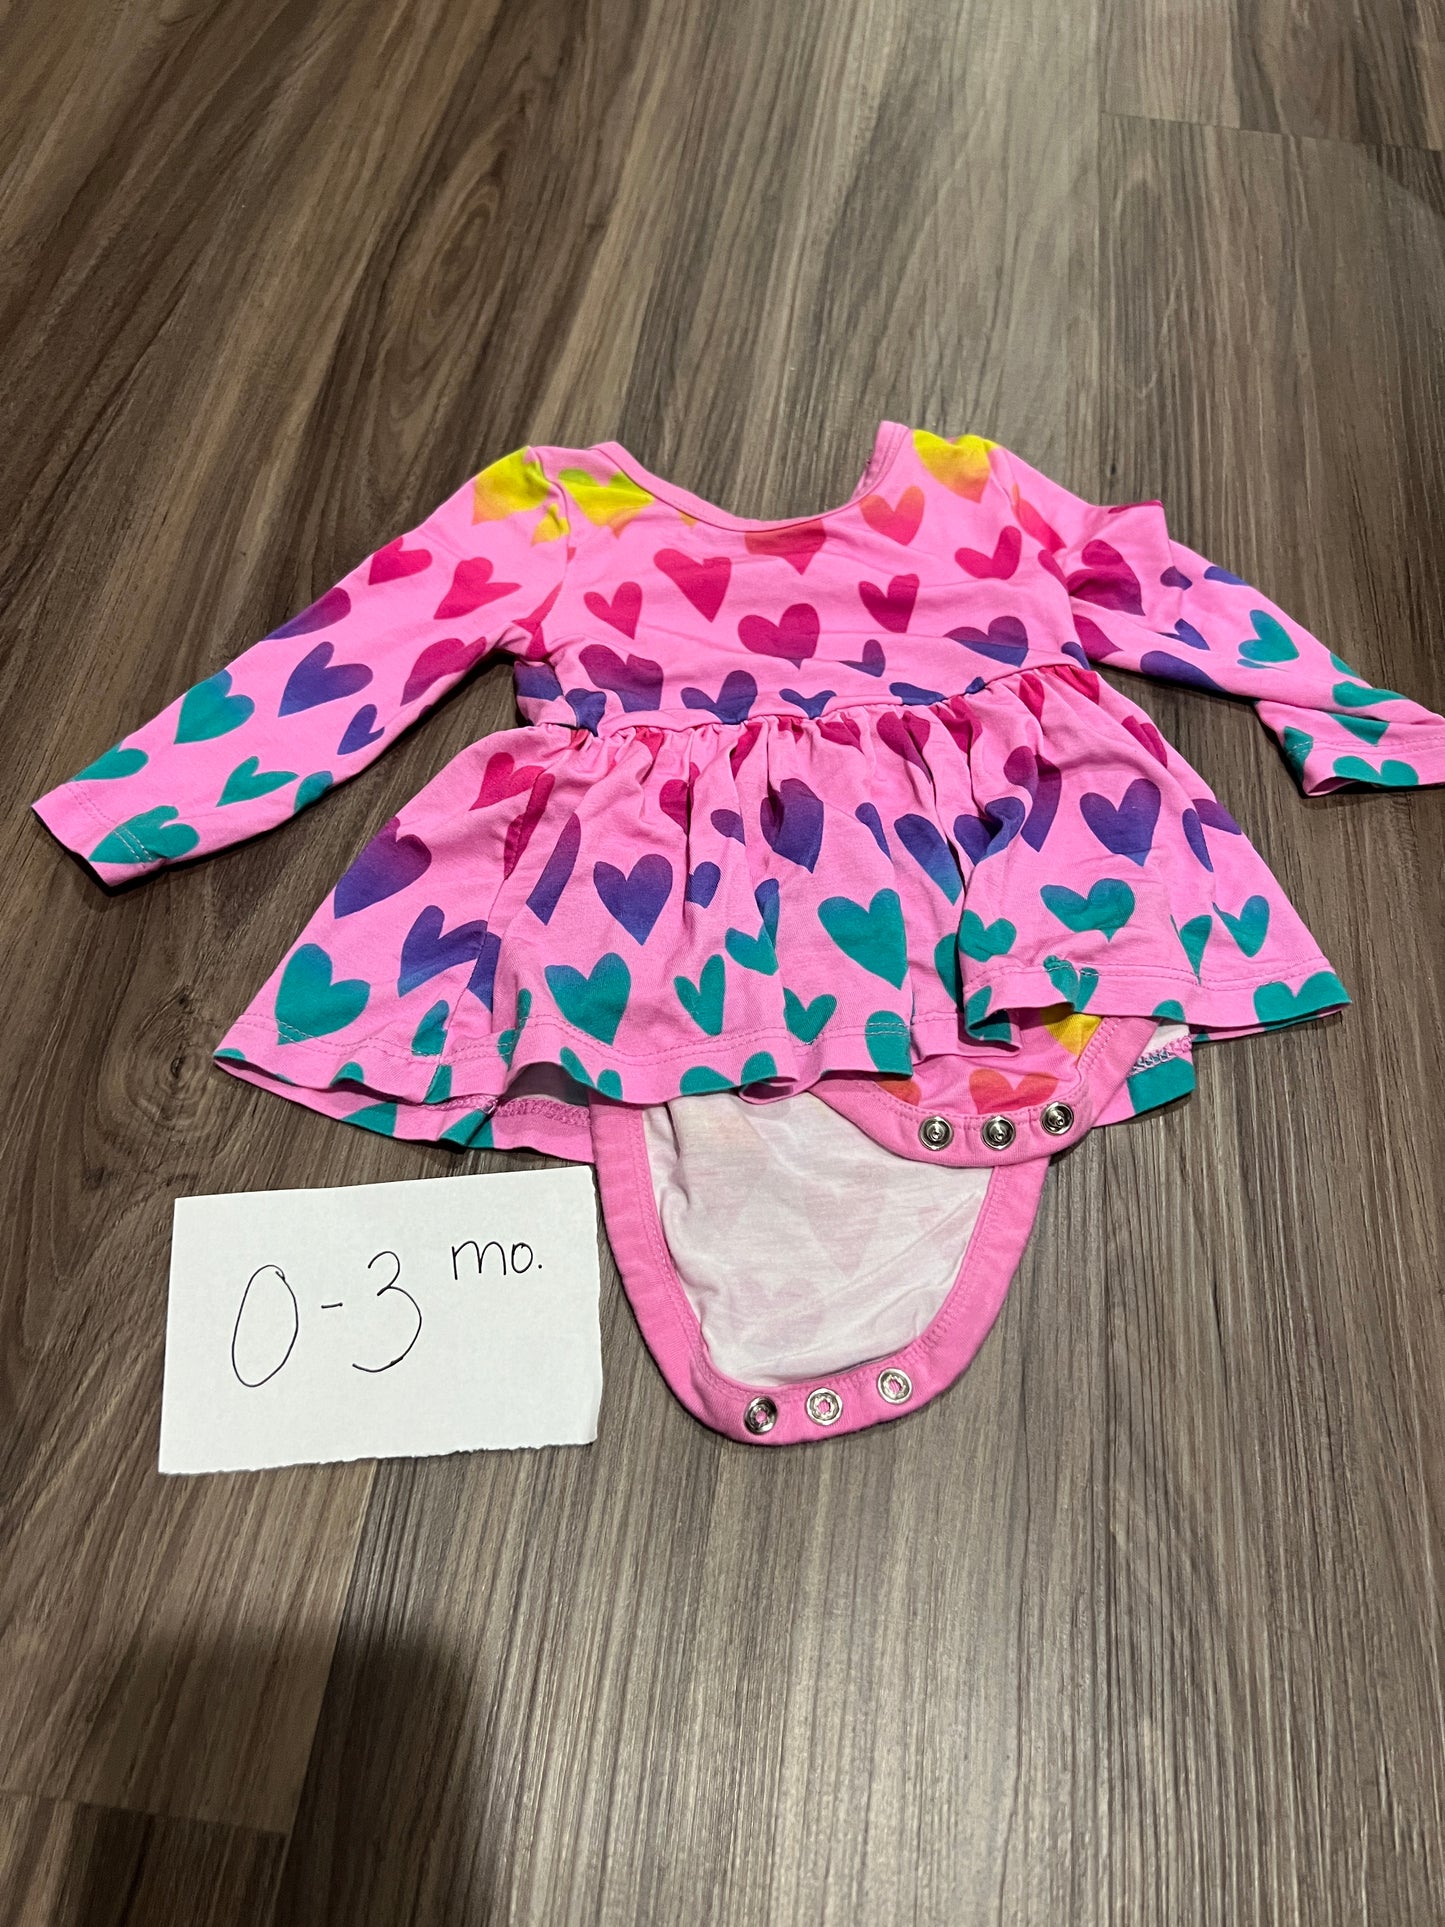 0-3 Mo - Little Sleepies - Pink Multi Colored Hearts LS Bodysuit Twirl - PU 45236 Except Semiannual Sale